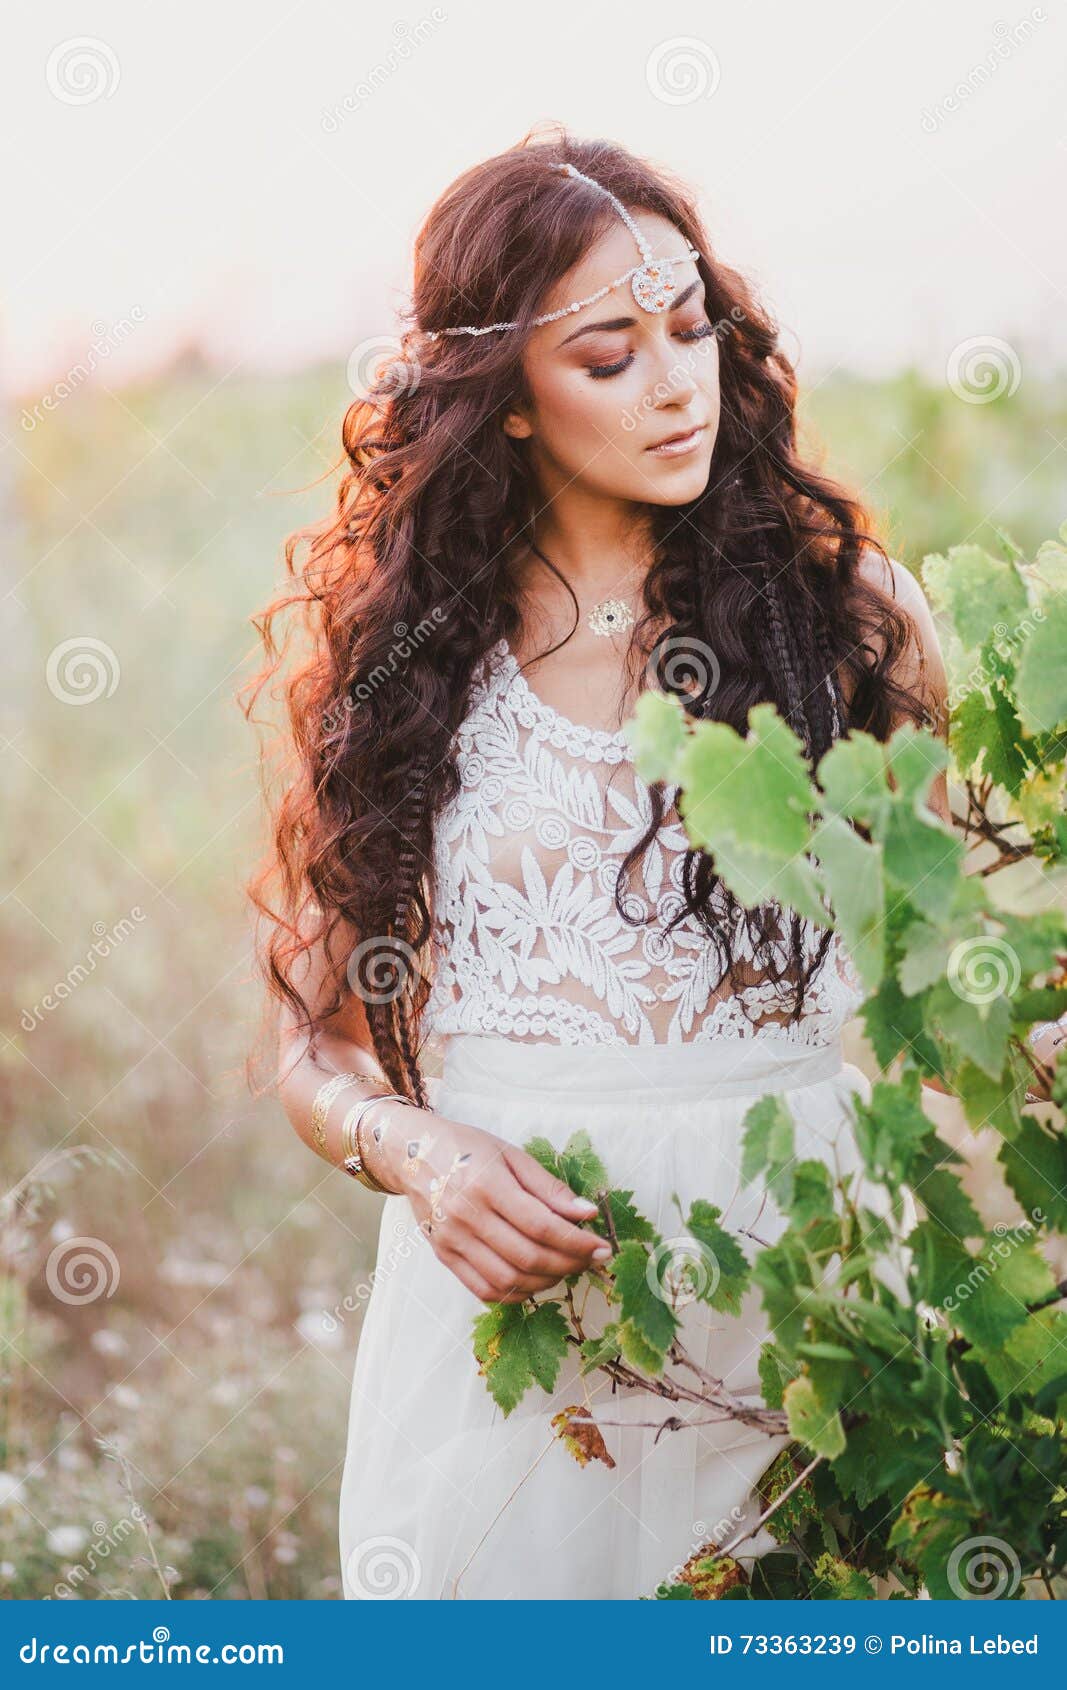 Beautiful Young Woman with Long Curly Hair Dressed in Boho Style Dress  Posing in a Field with Dandelions Stock Image - Image of hippie, female:  73363239